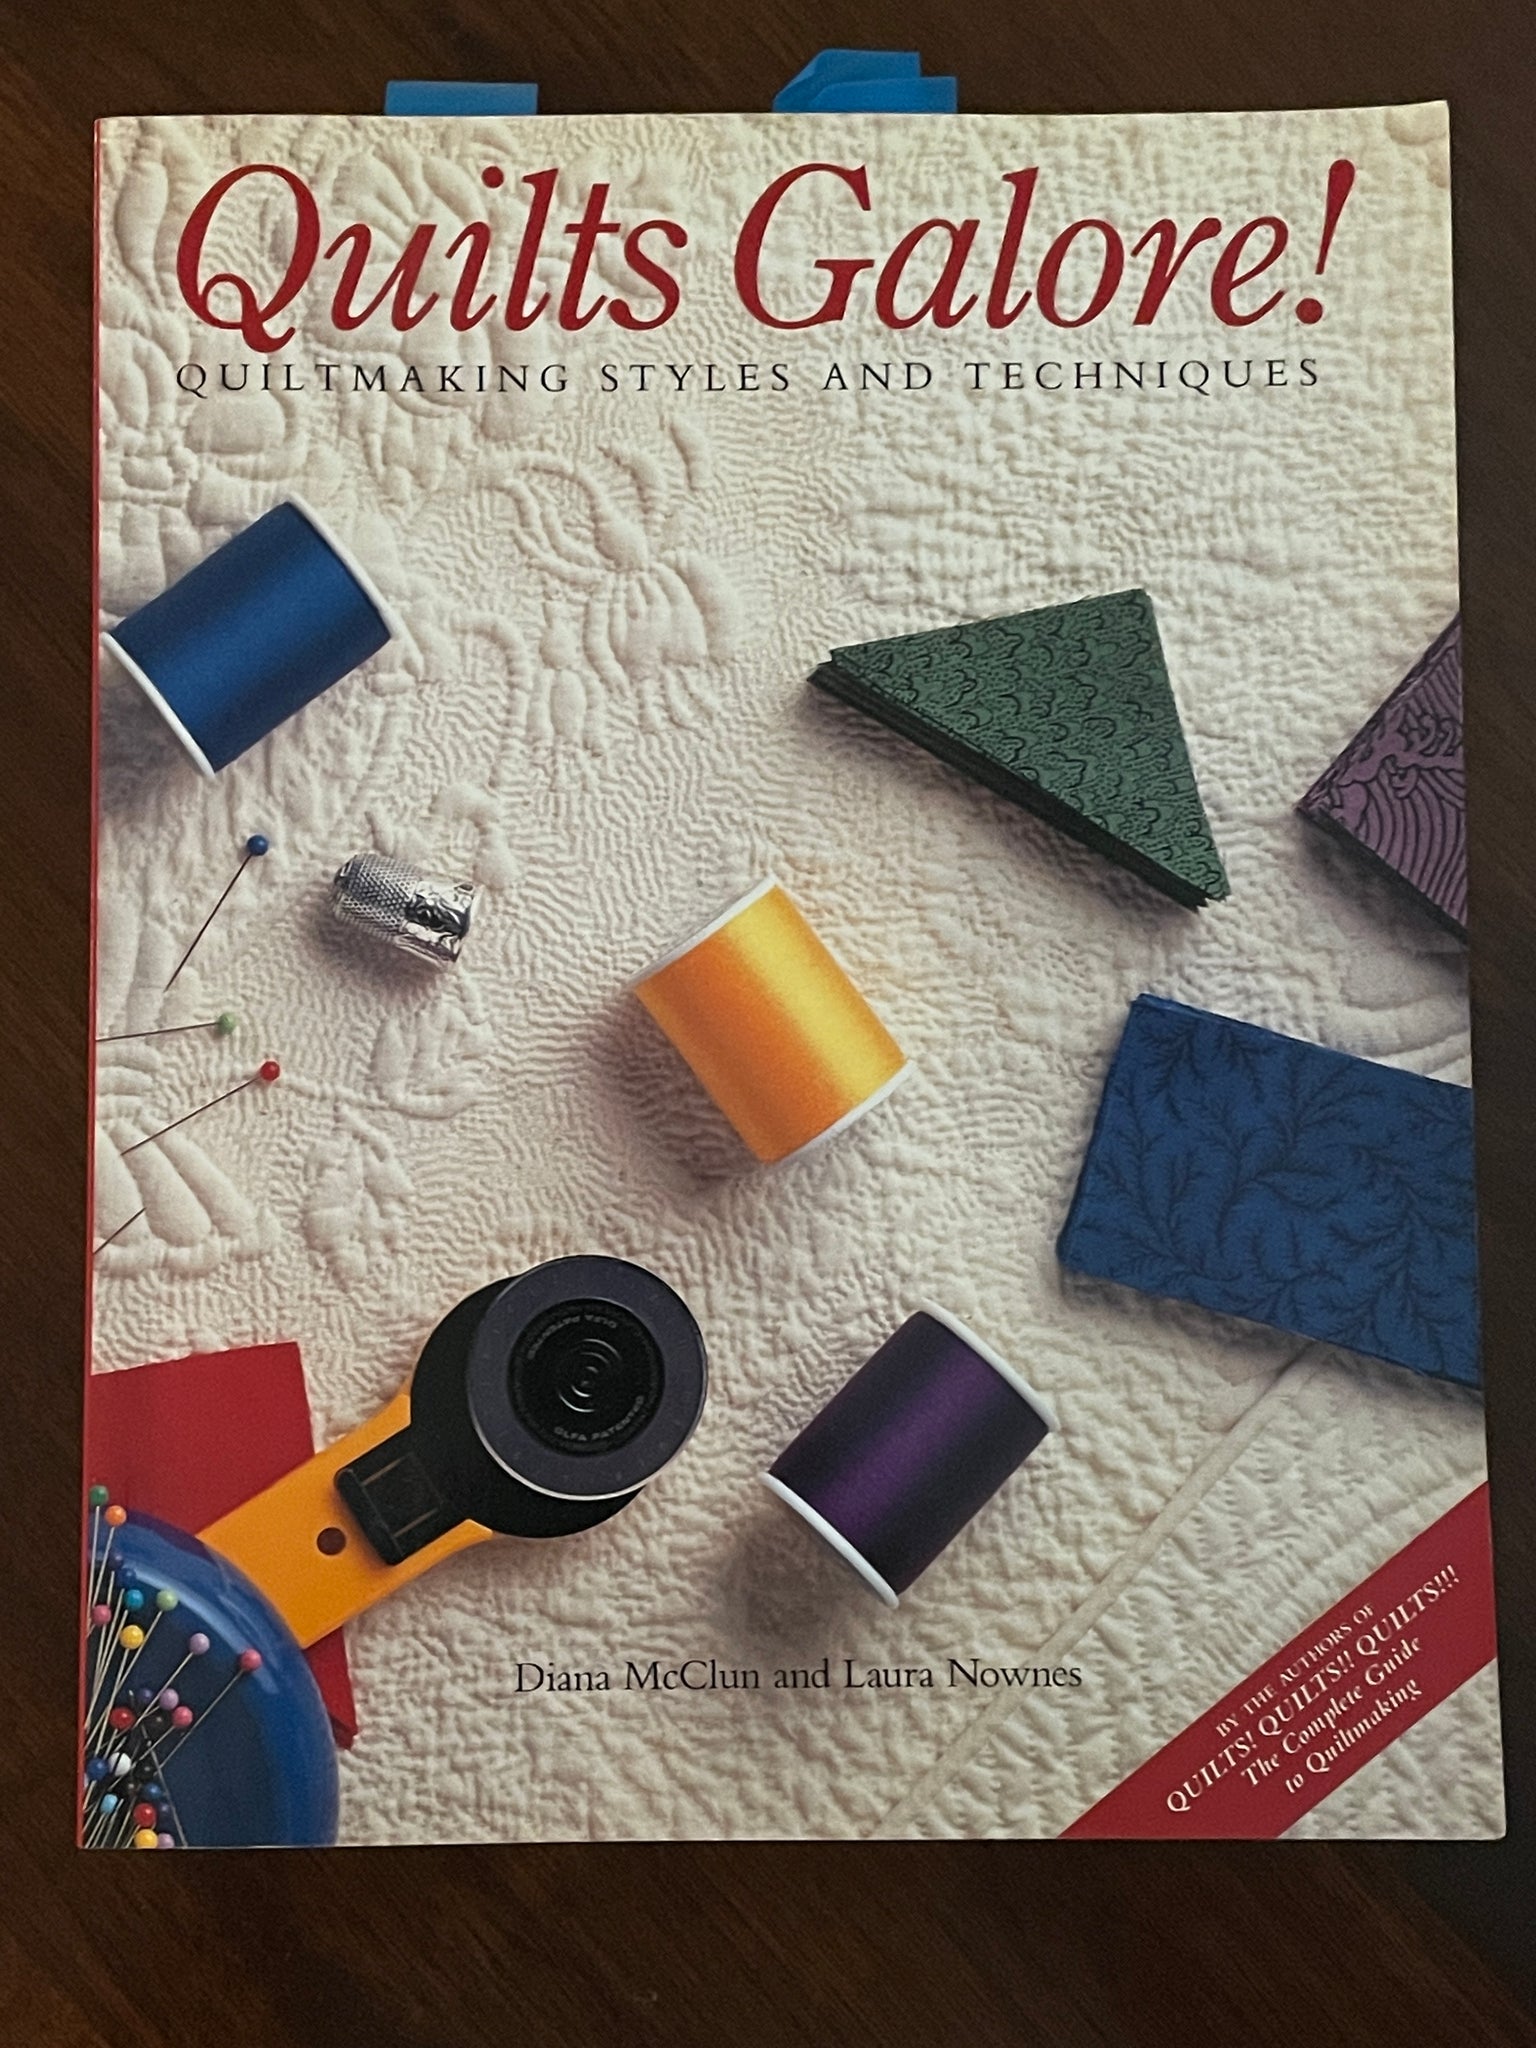 SALE 1990 Quilting Book - Quilts Galore!